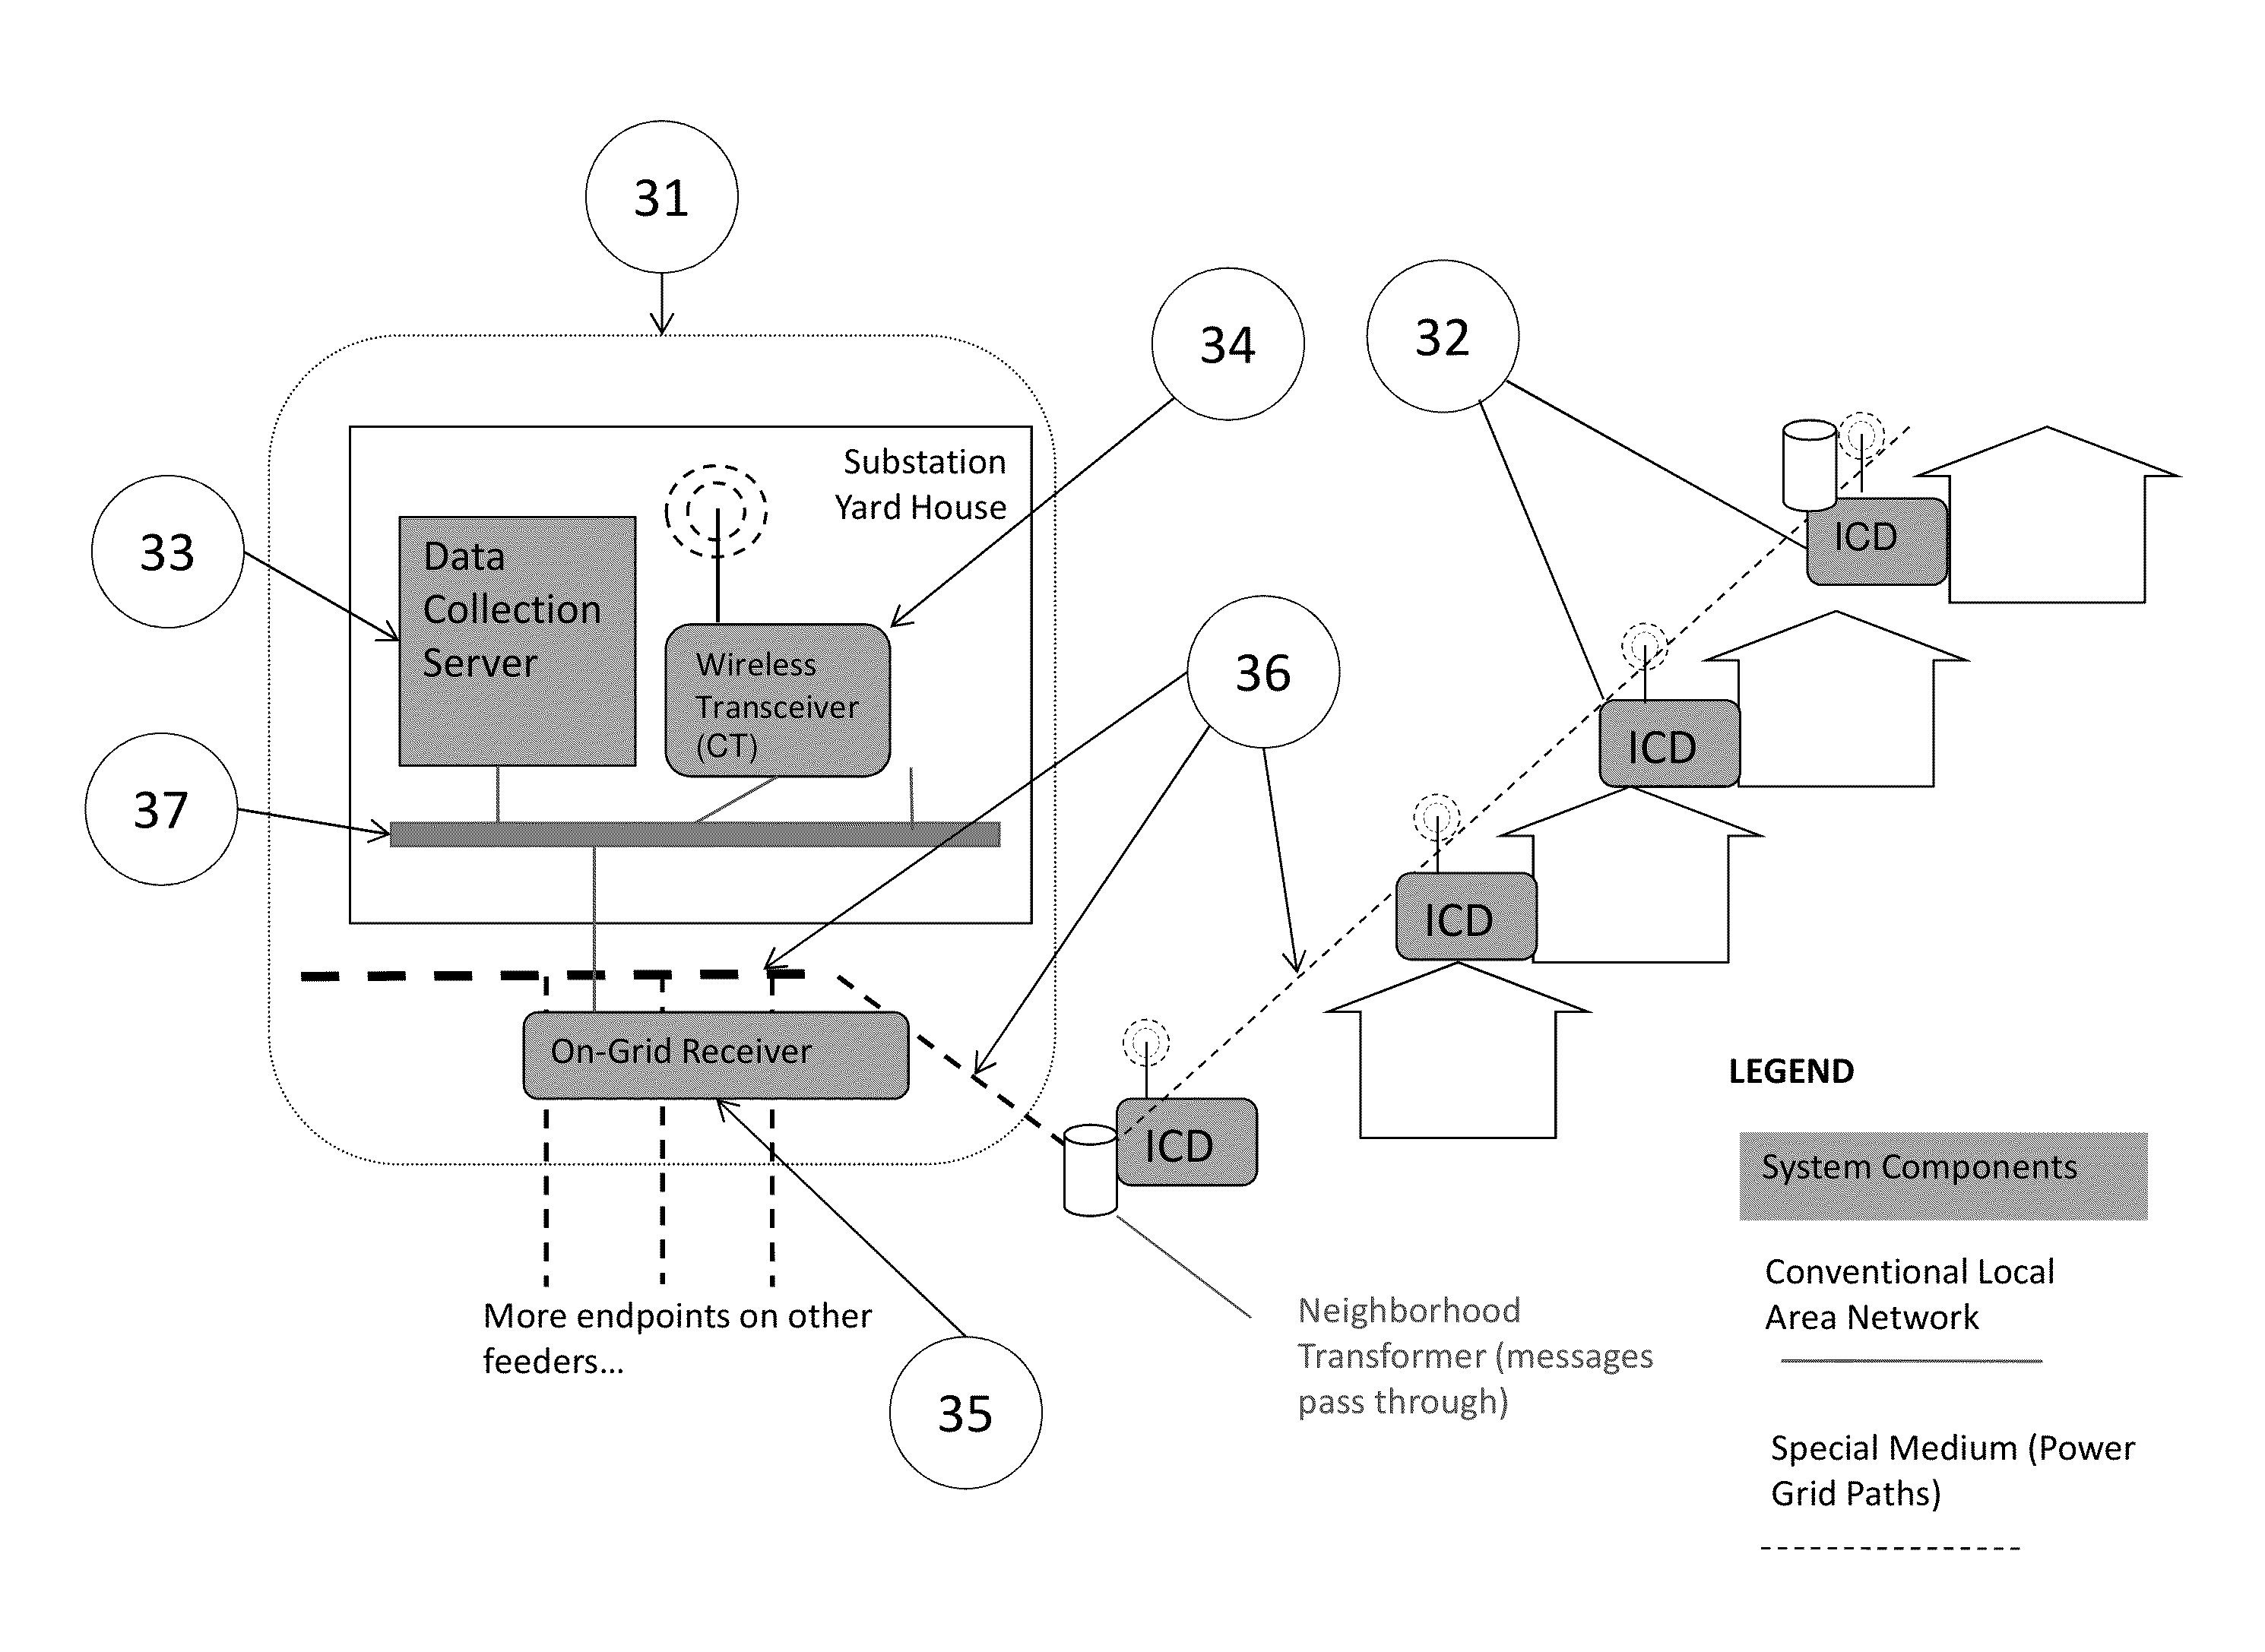 System and methods for synchronizing edge devices on channels without carrier sense